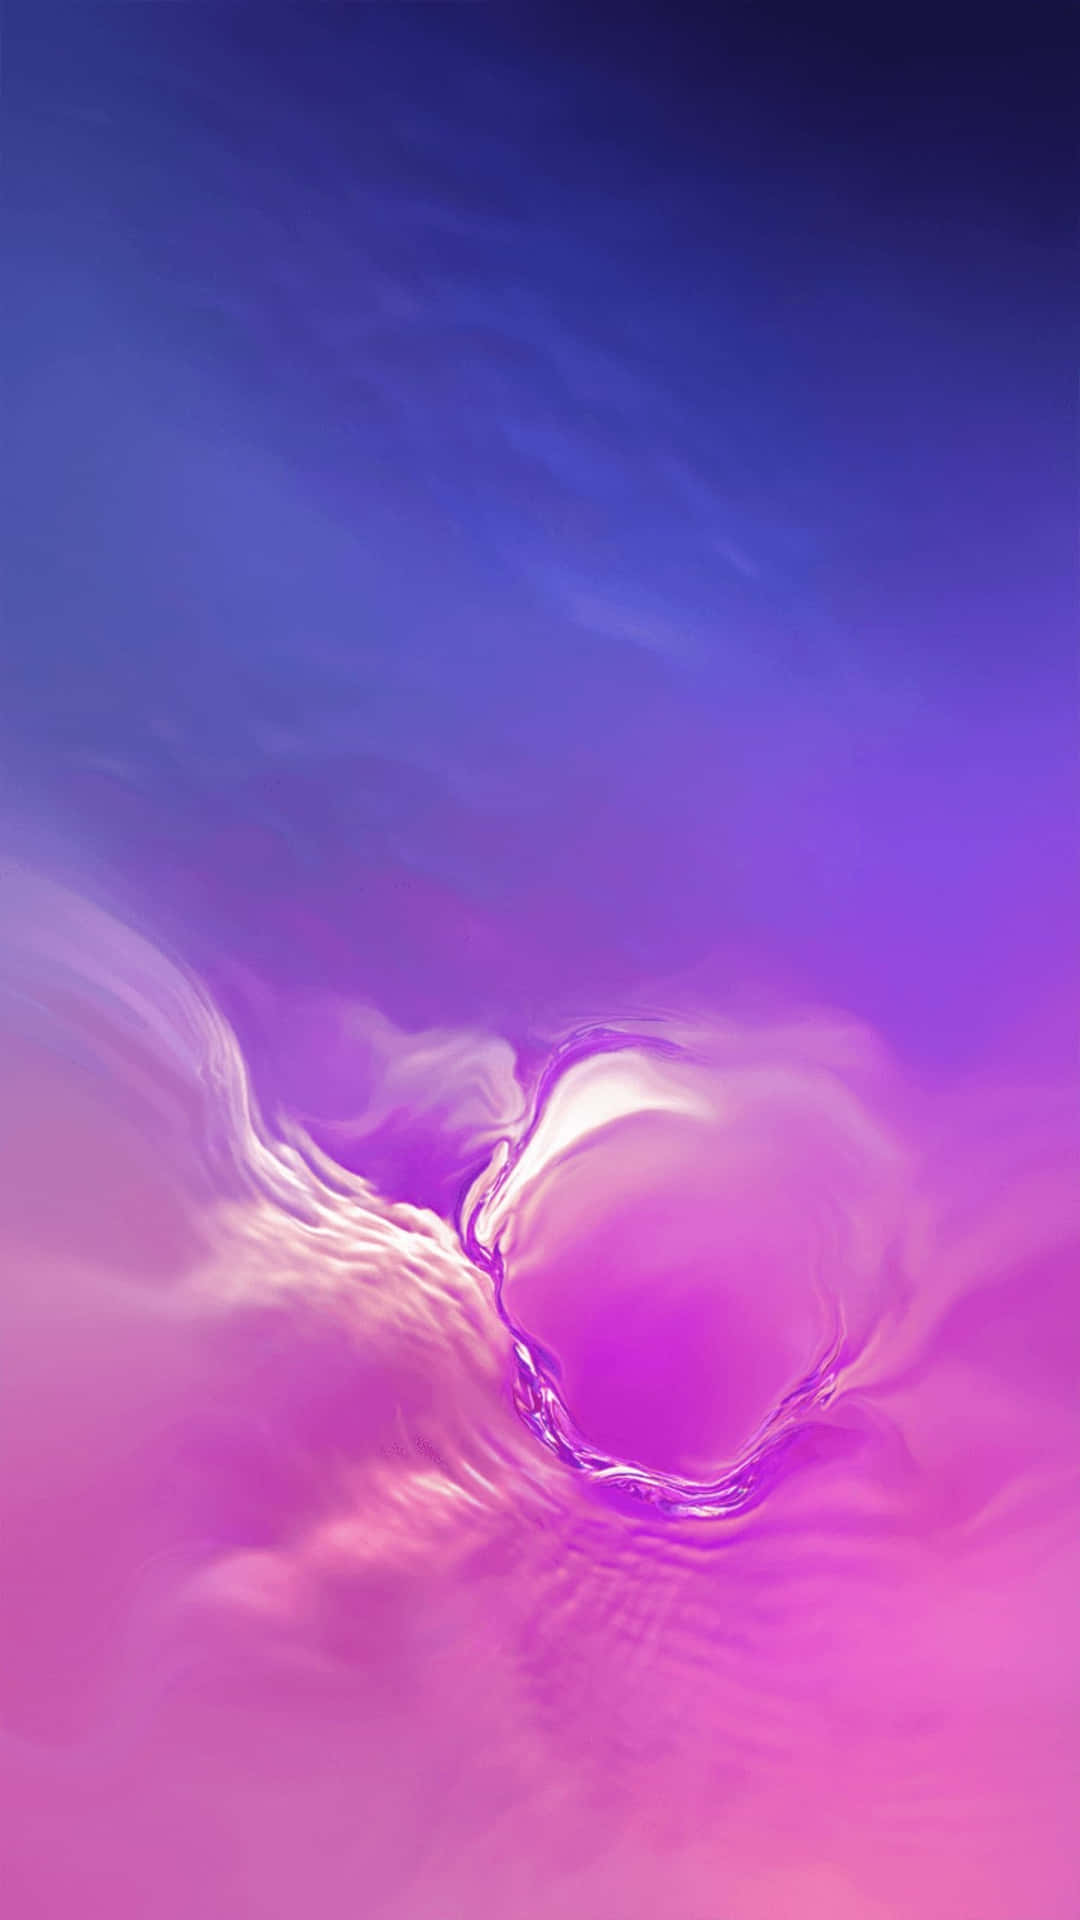 A galaxy themed background for Galaxy Note Wallpaper